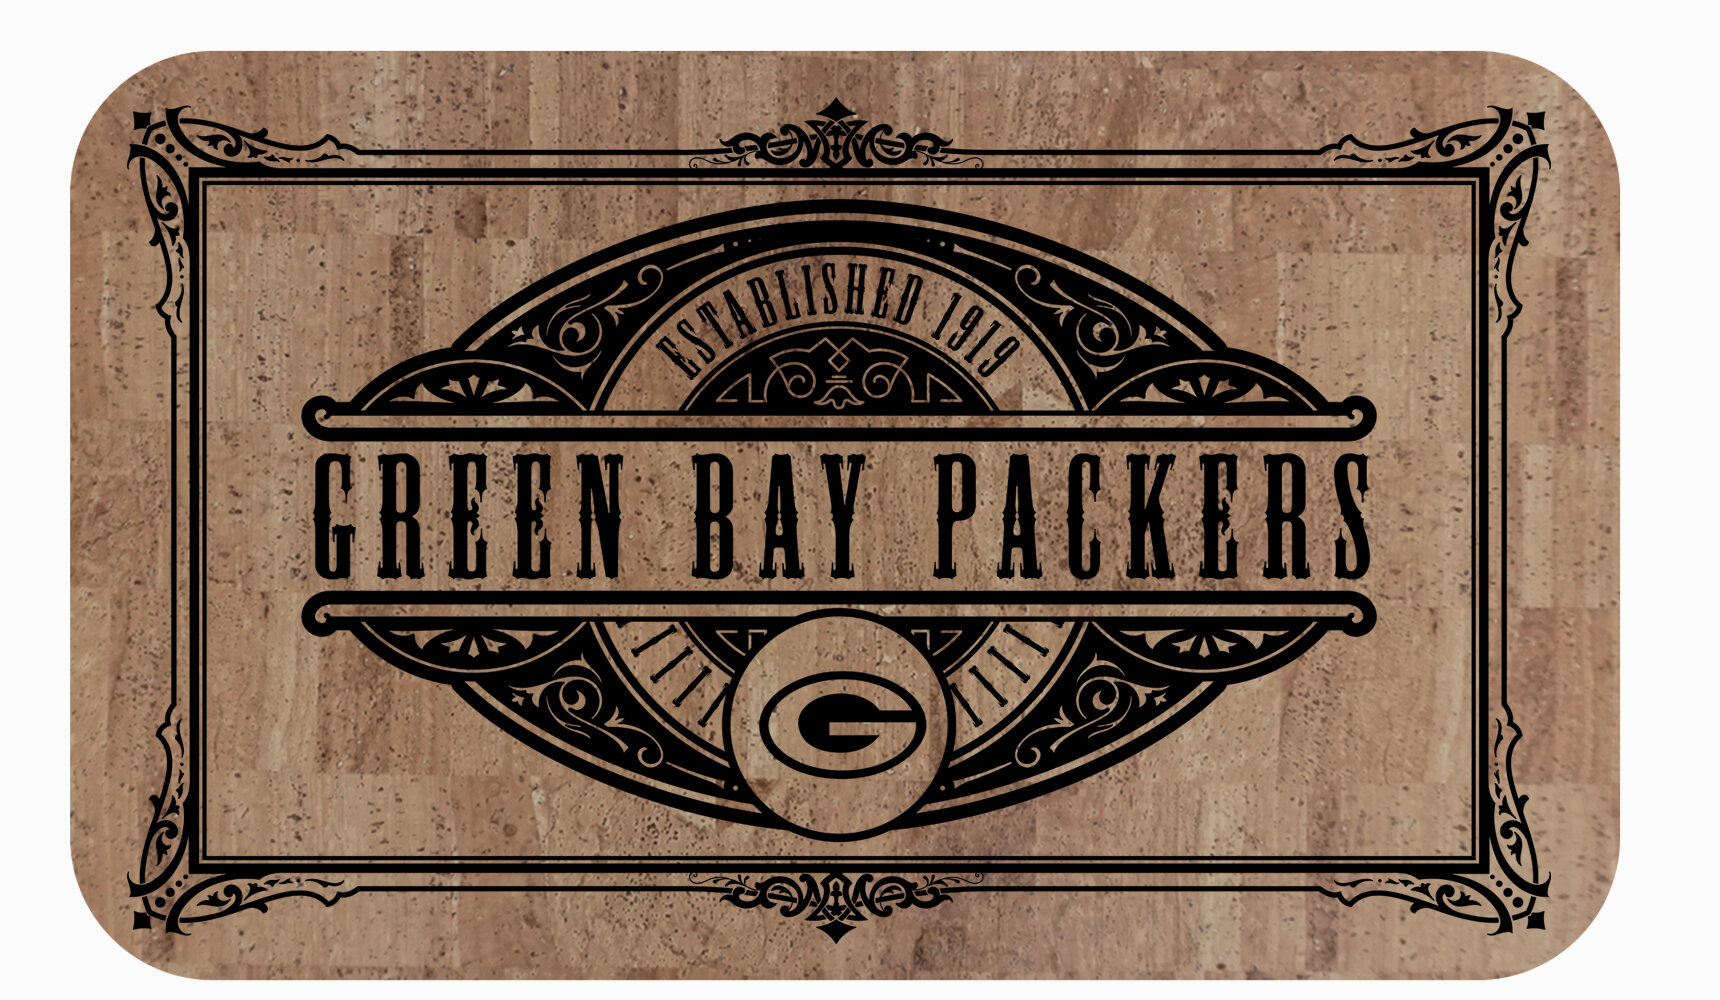 Green Nfl Bay Packers Cork Comfort Anti Fatigue Mat with size 1720 X 1000